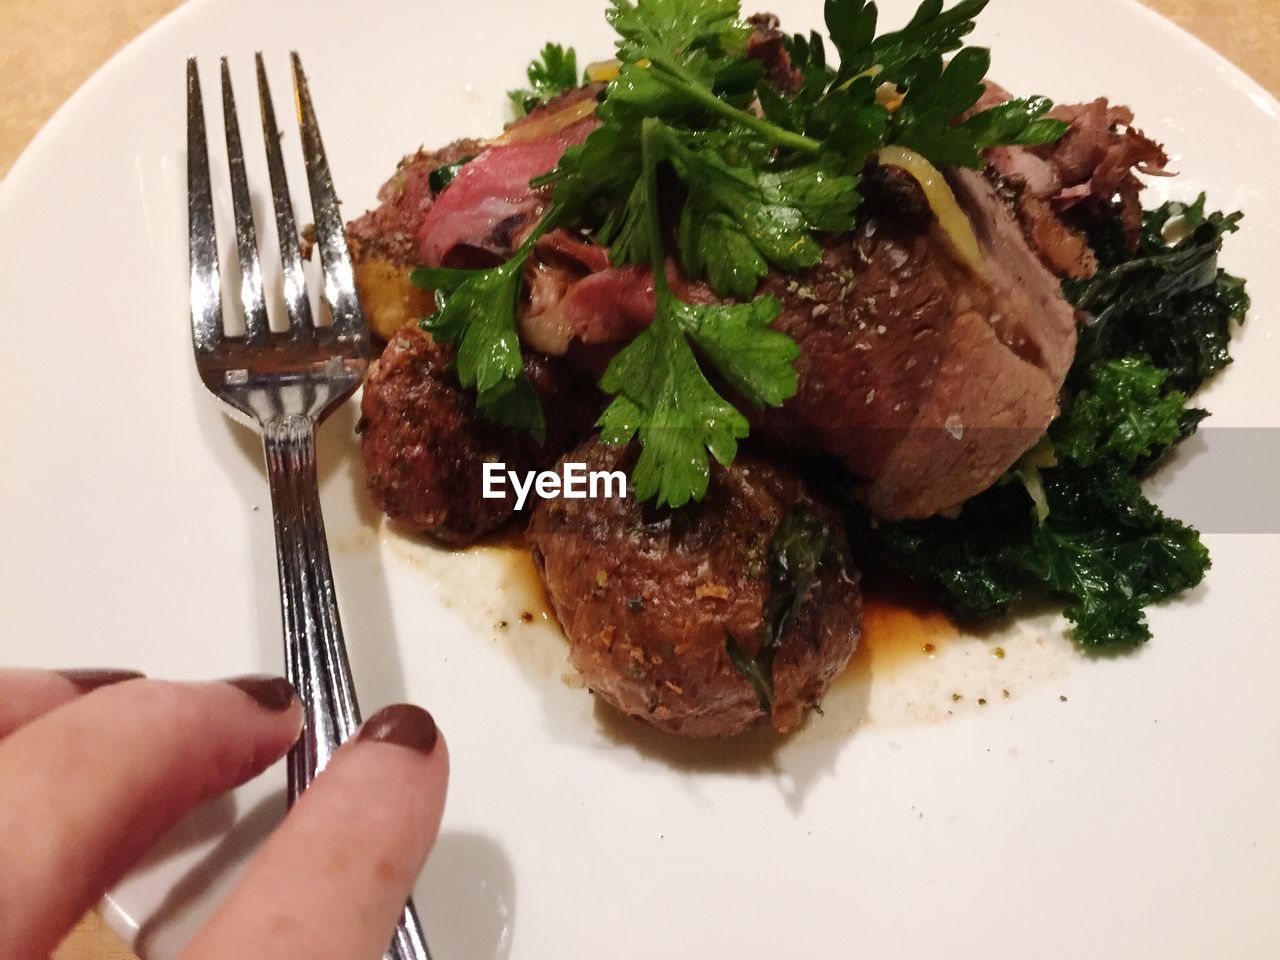 CLOSE-UP OF HAND HOLDING MEAT WITH SALAD